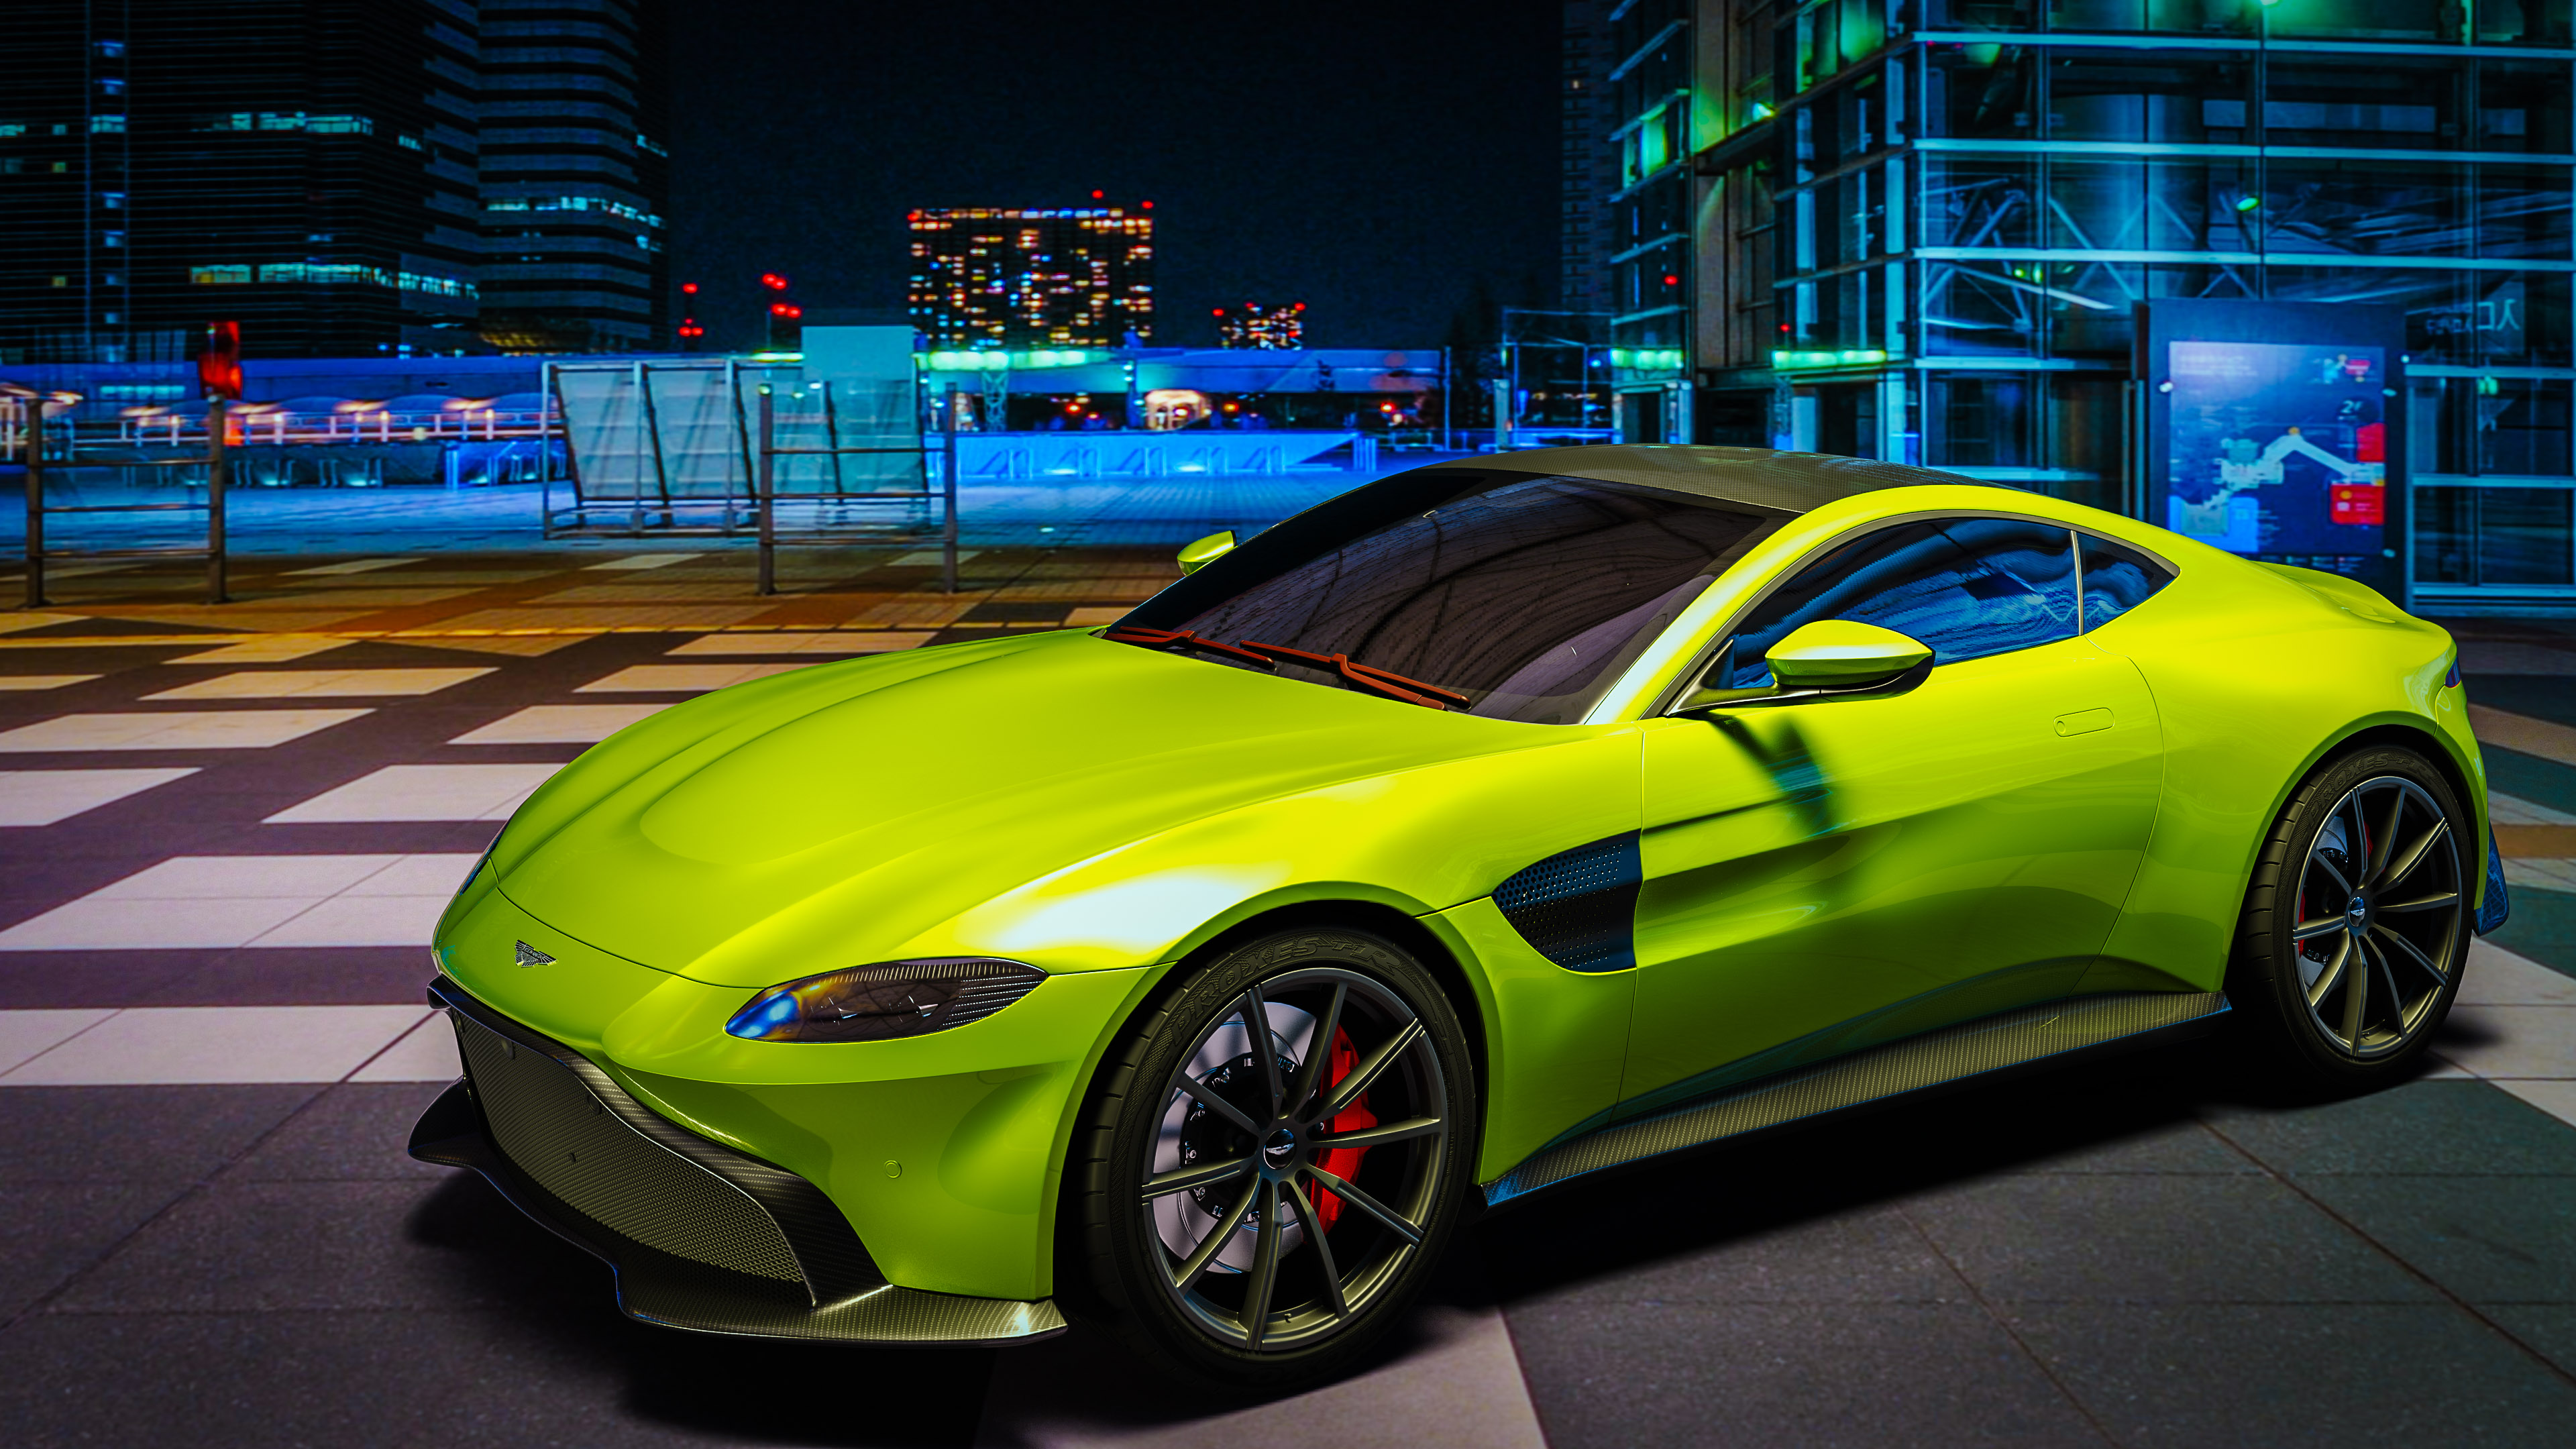 Immerse in the world of luxury with our sports car wallpaper featuring the Aston Martin Vantage, a symbol of British performance and elegance.